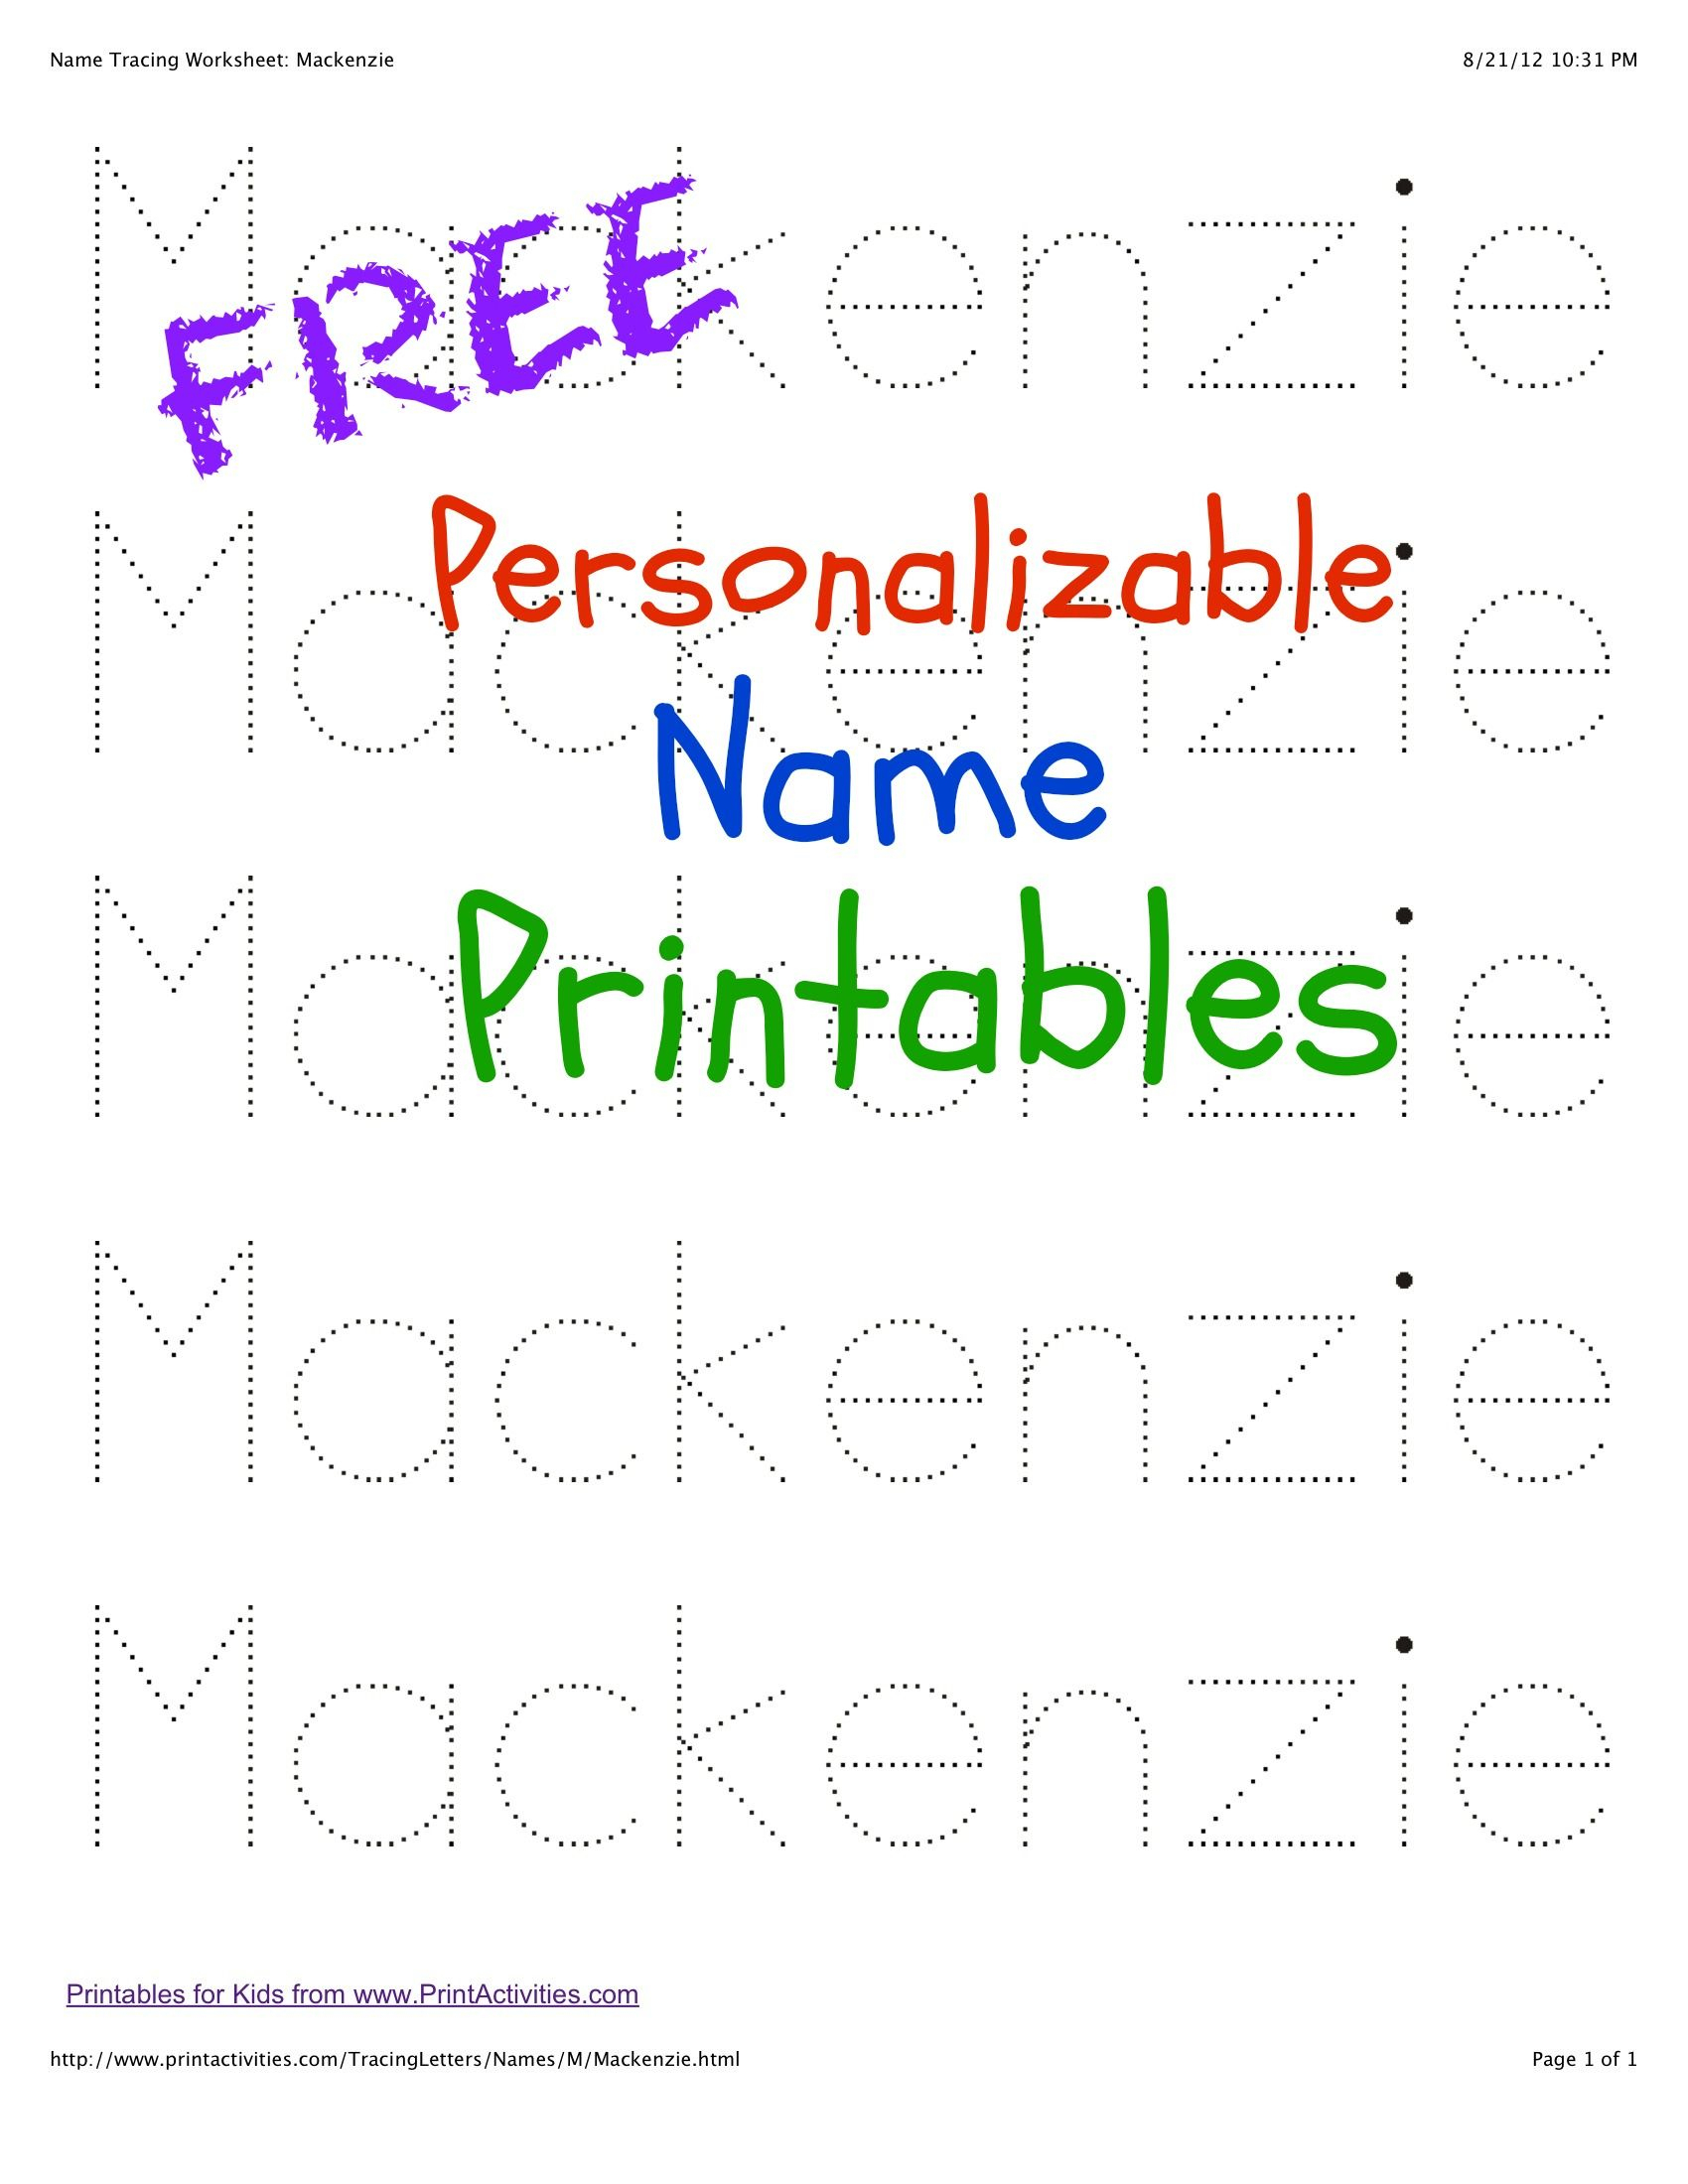 Pintheresa Mcduffie On Educational For Kids | Pinterest - Free Printable Name Tracing Worksheets